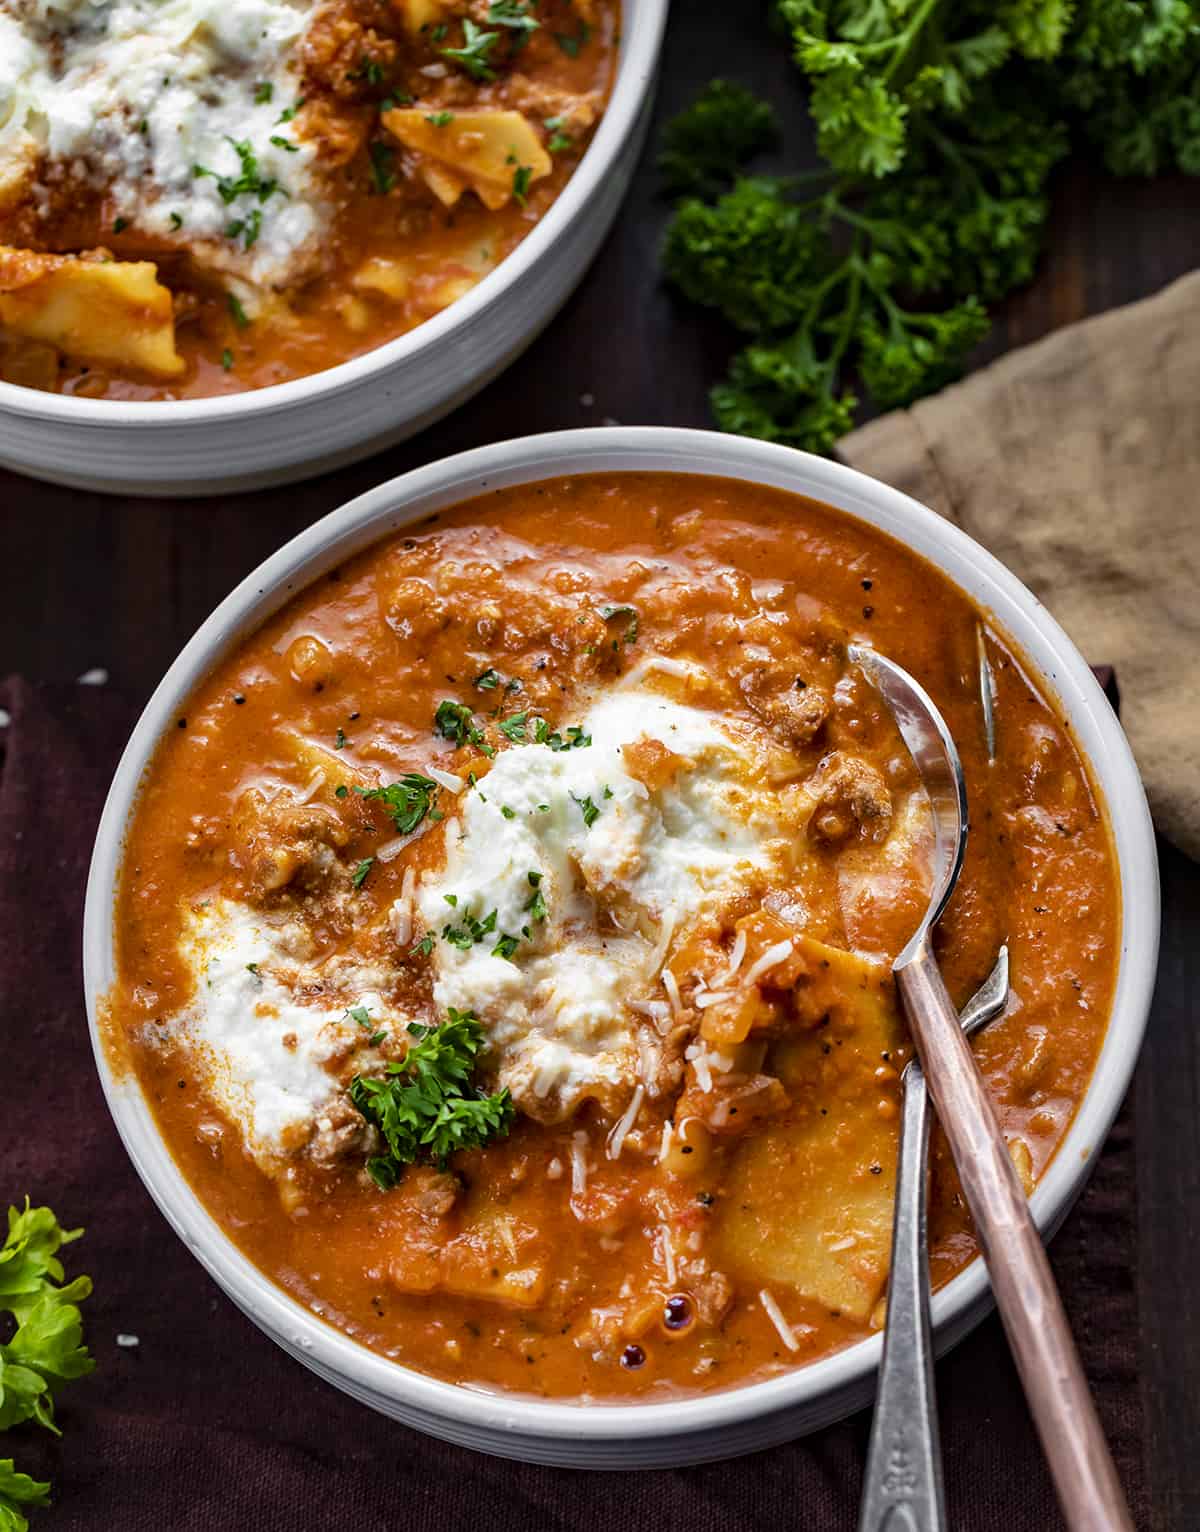 Bowls of Lasagna Soup. Soups, Hearty Soups, Lasagna, Comfort Food, Winter Soups, Fall Soups, Easy Soups, Dinner, Supper, How to Make the Best Lasagna Soup, i am homesteader, iamhomesteader